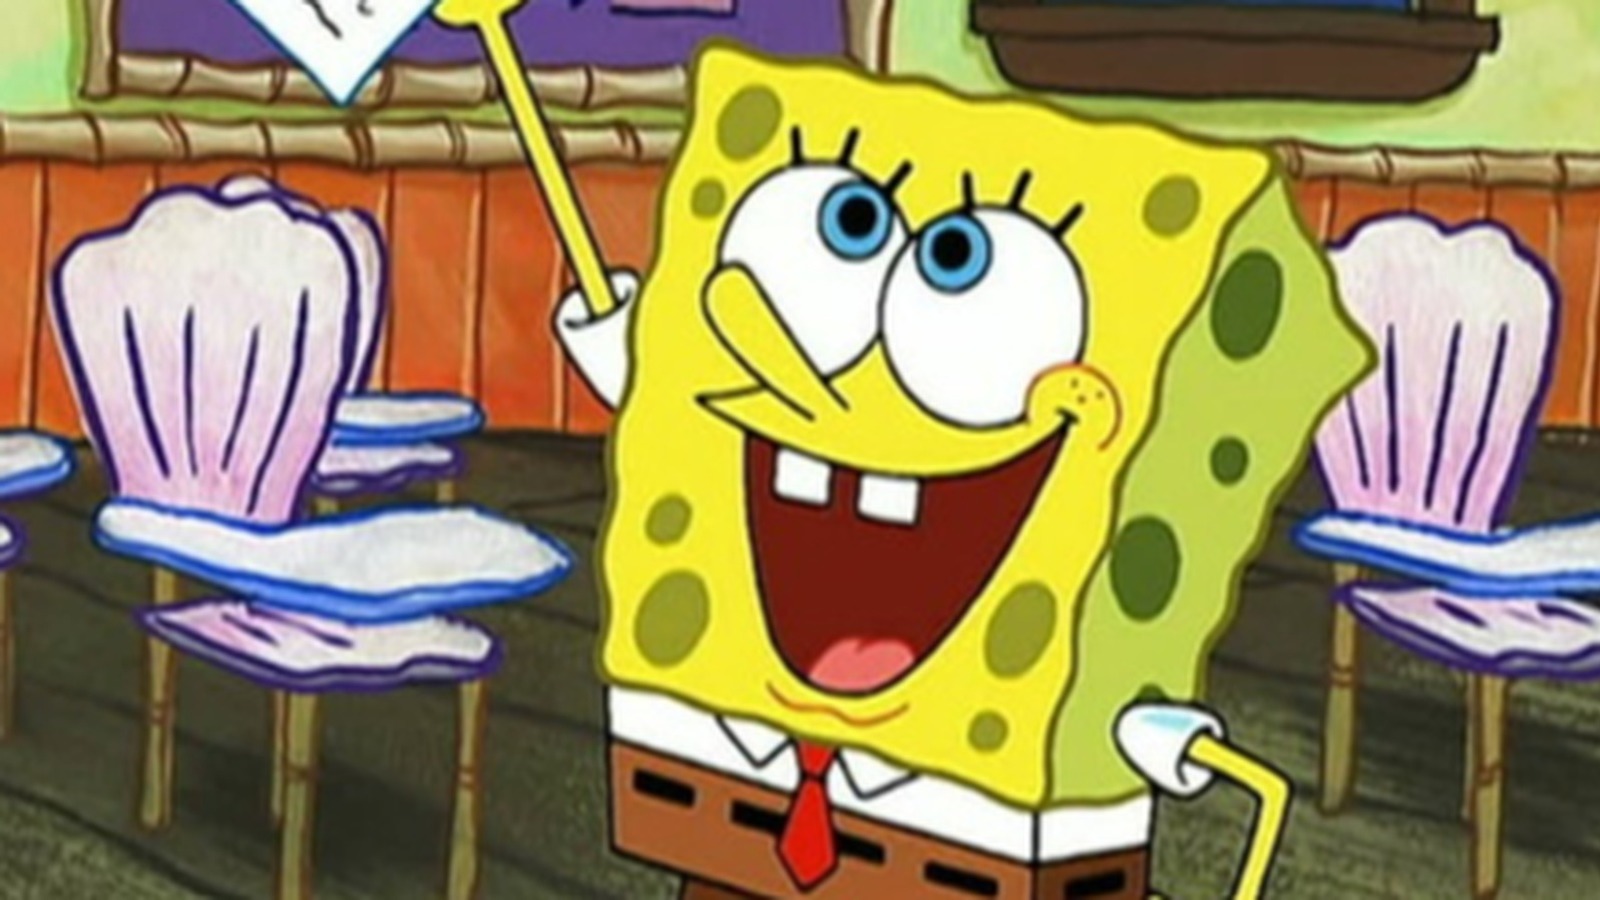 What You Need To Know About The SpongeBob Timeline